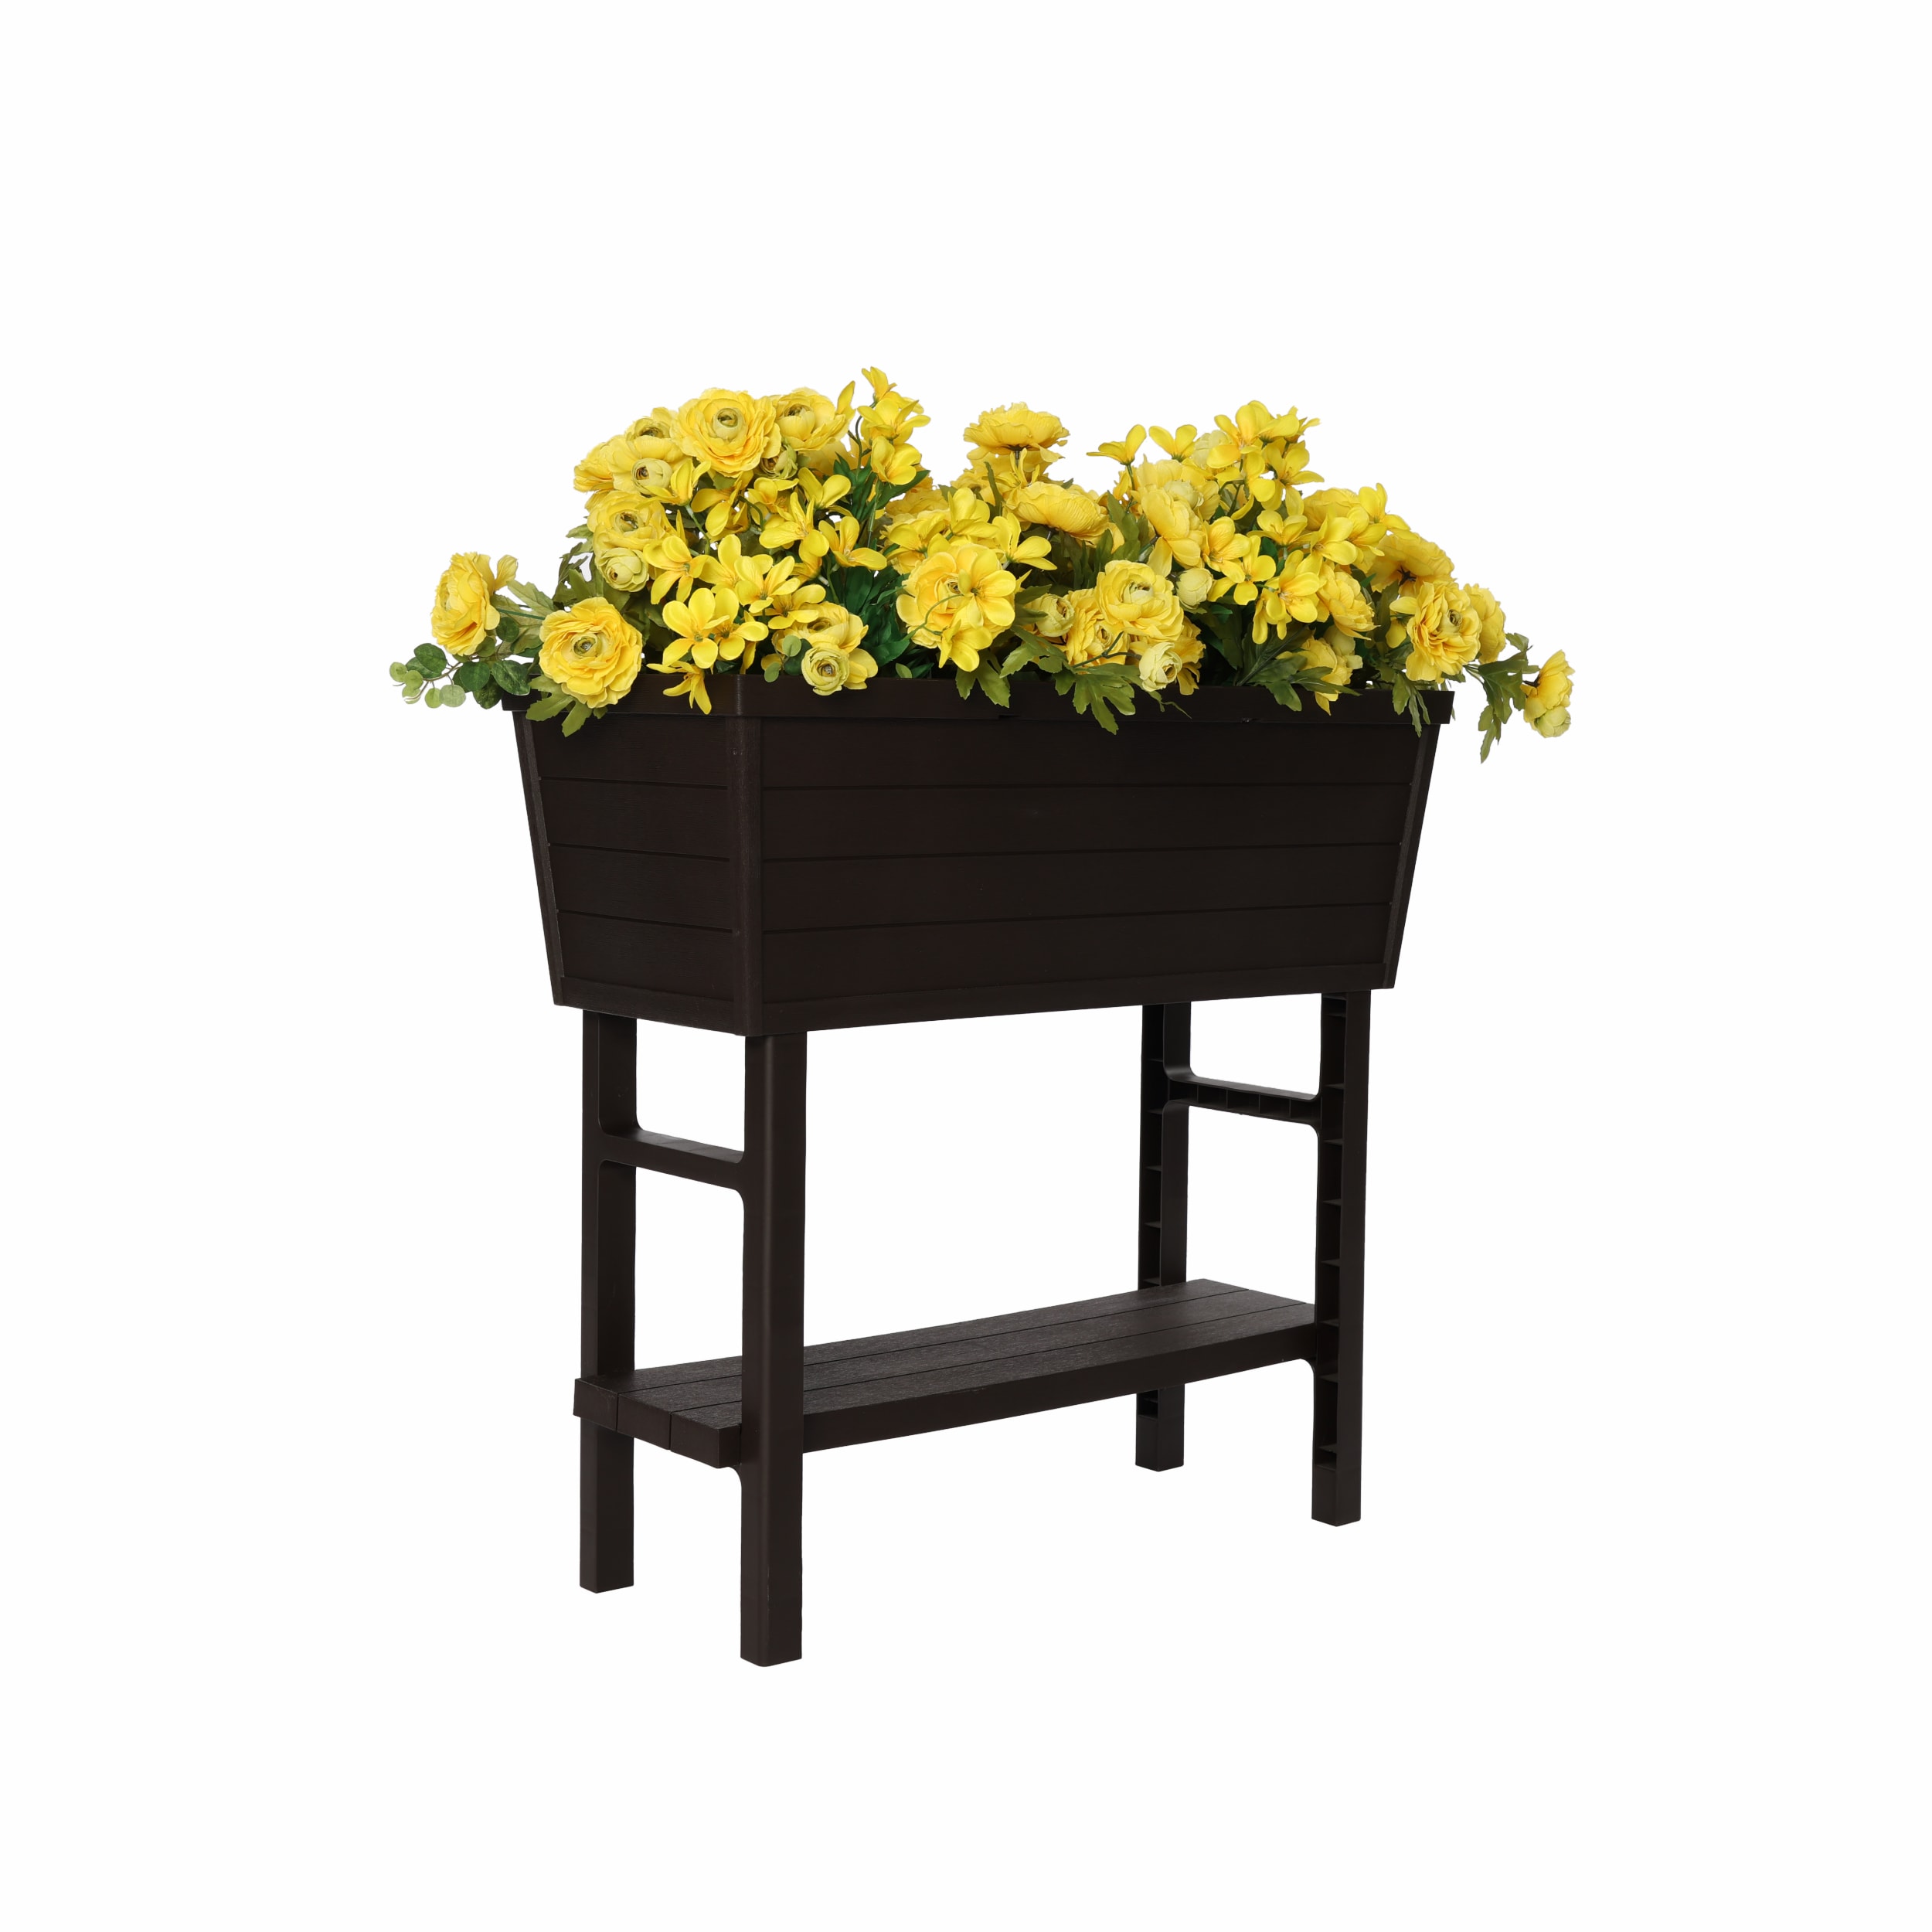 19.5 in. L x 44.5 in. W x 29.75 in. H Brown Polypropylene Raised